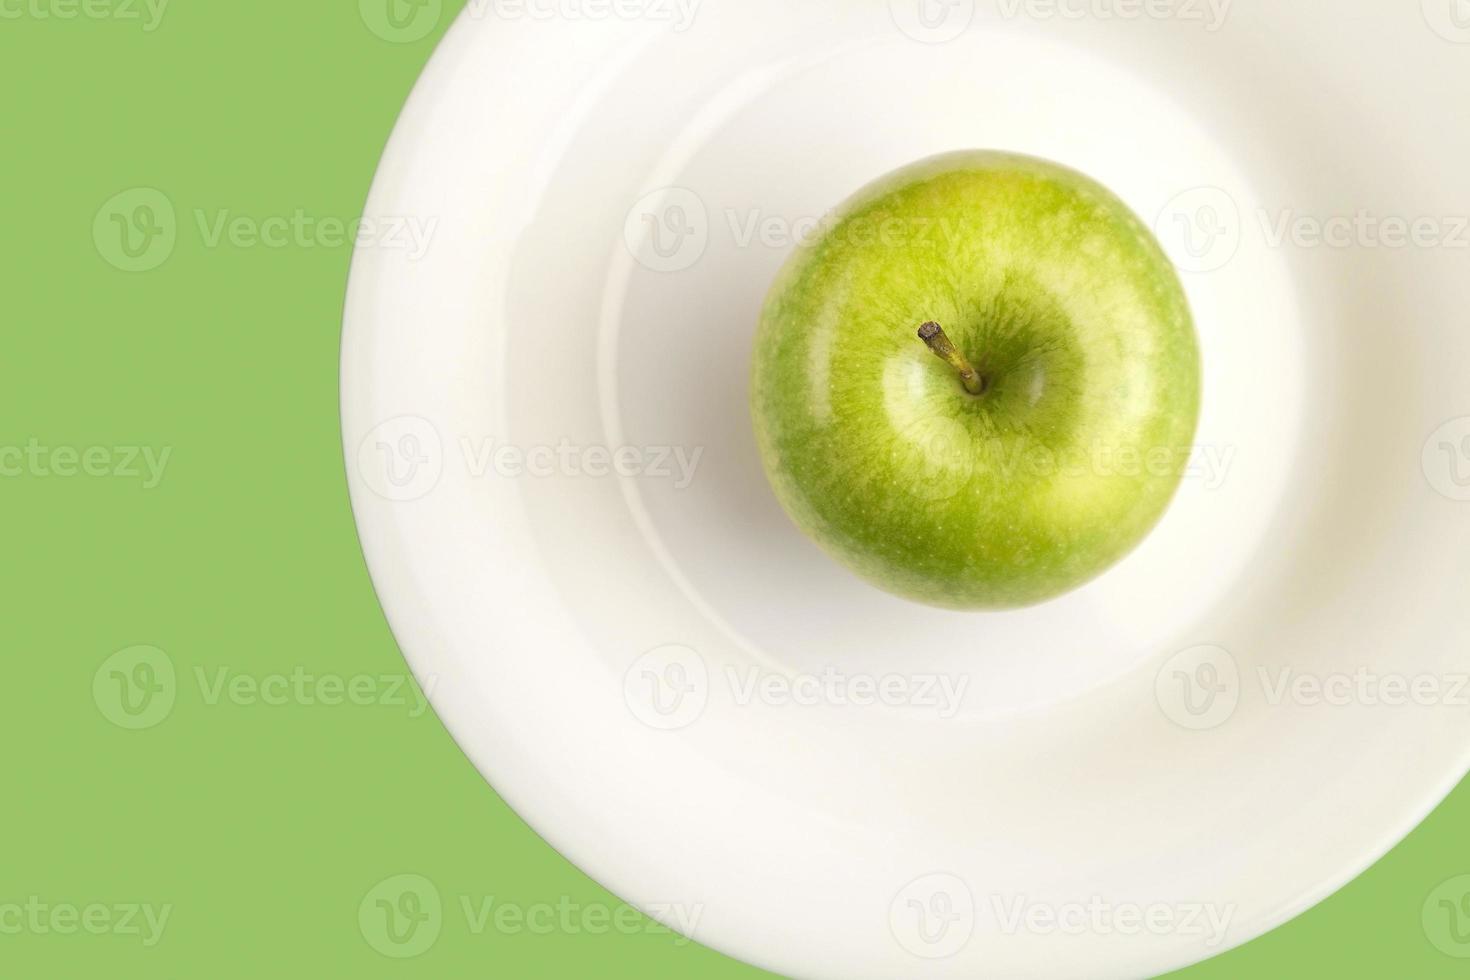 Green apple on white plate. Simple healthy lifestyle flat lay with an apple on a plate. photo